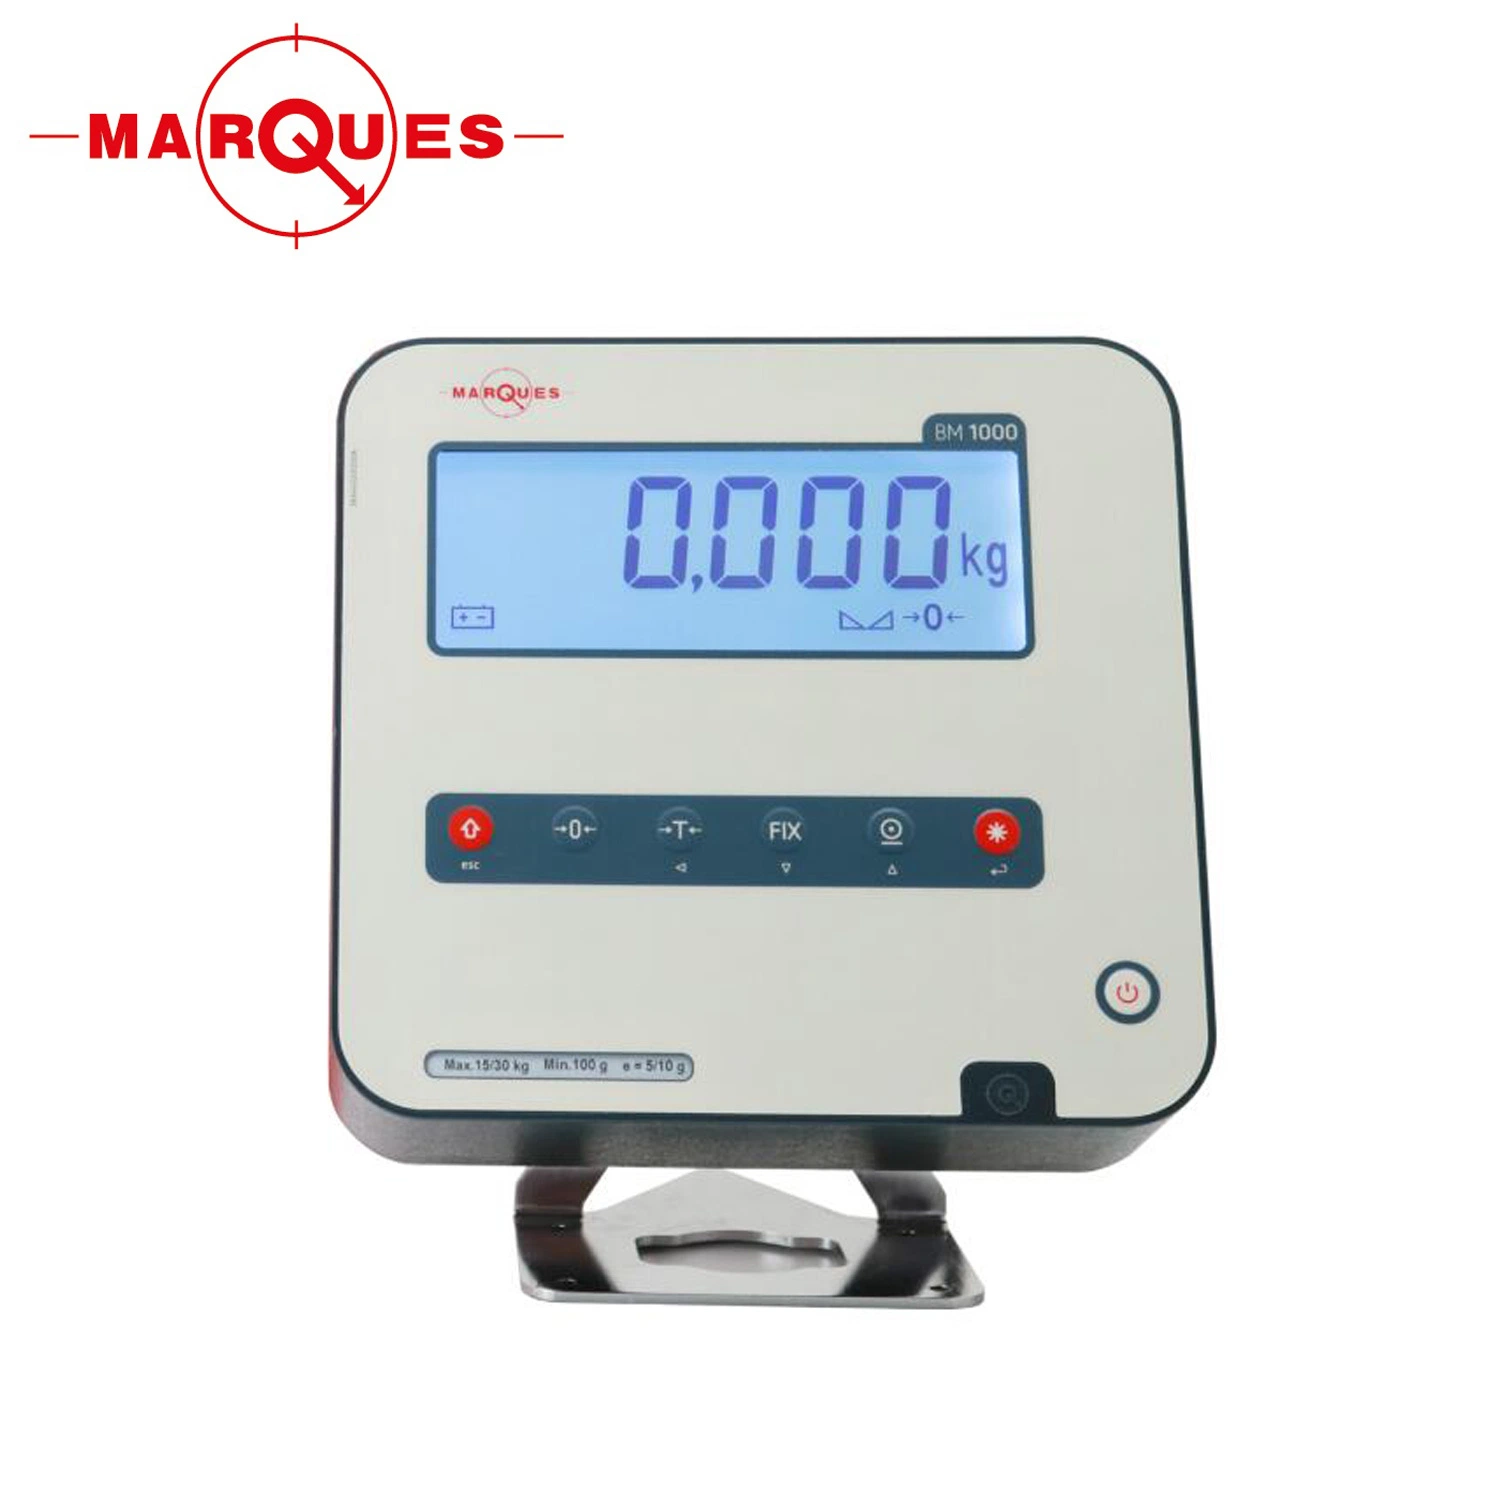 IP65 Weight Indicator with LCD Display Used for Floor Scales and Truck Scales CE Approval